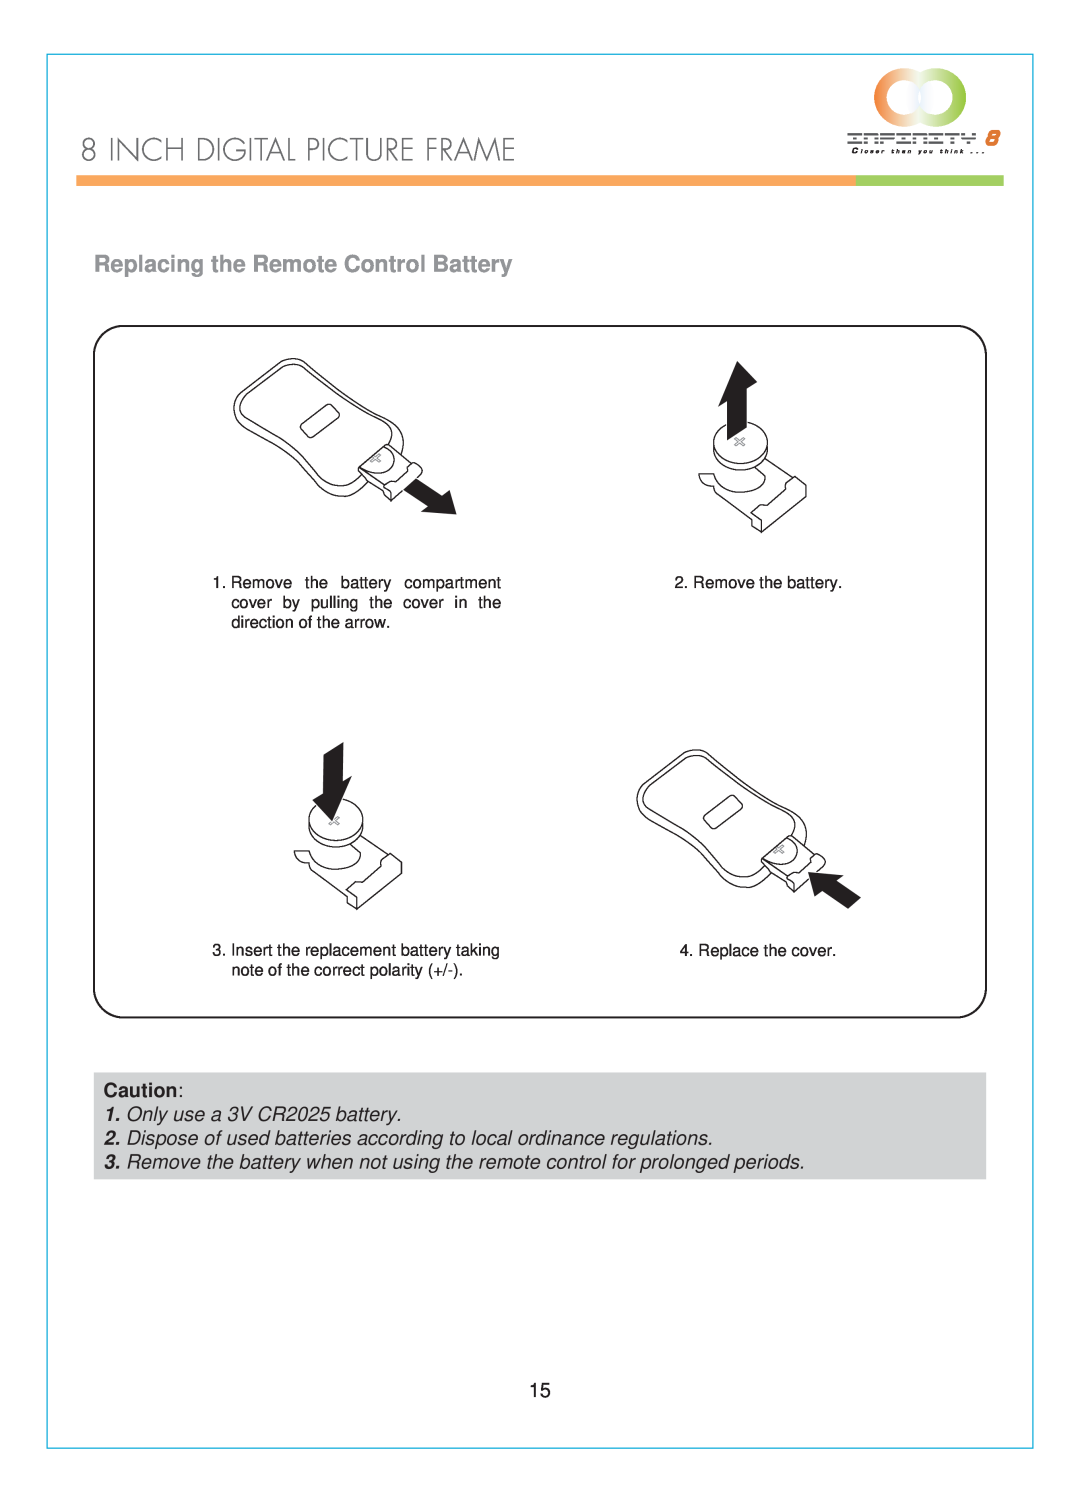 Infinity DPF-8000 user manual Replacing the Remote Control Battery, Inch Digital Picture Frame 